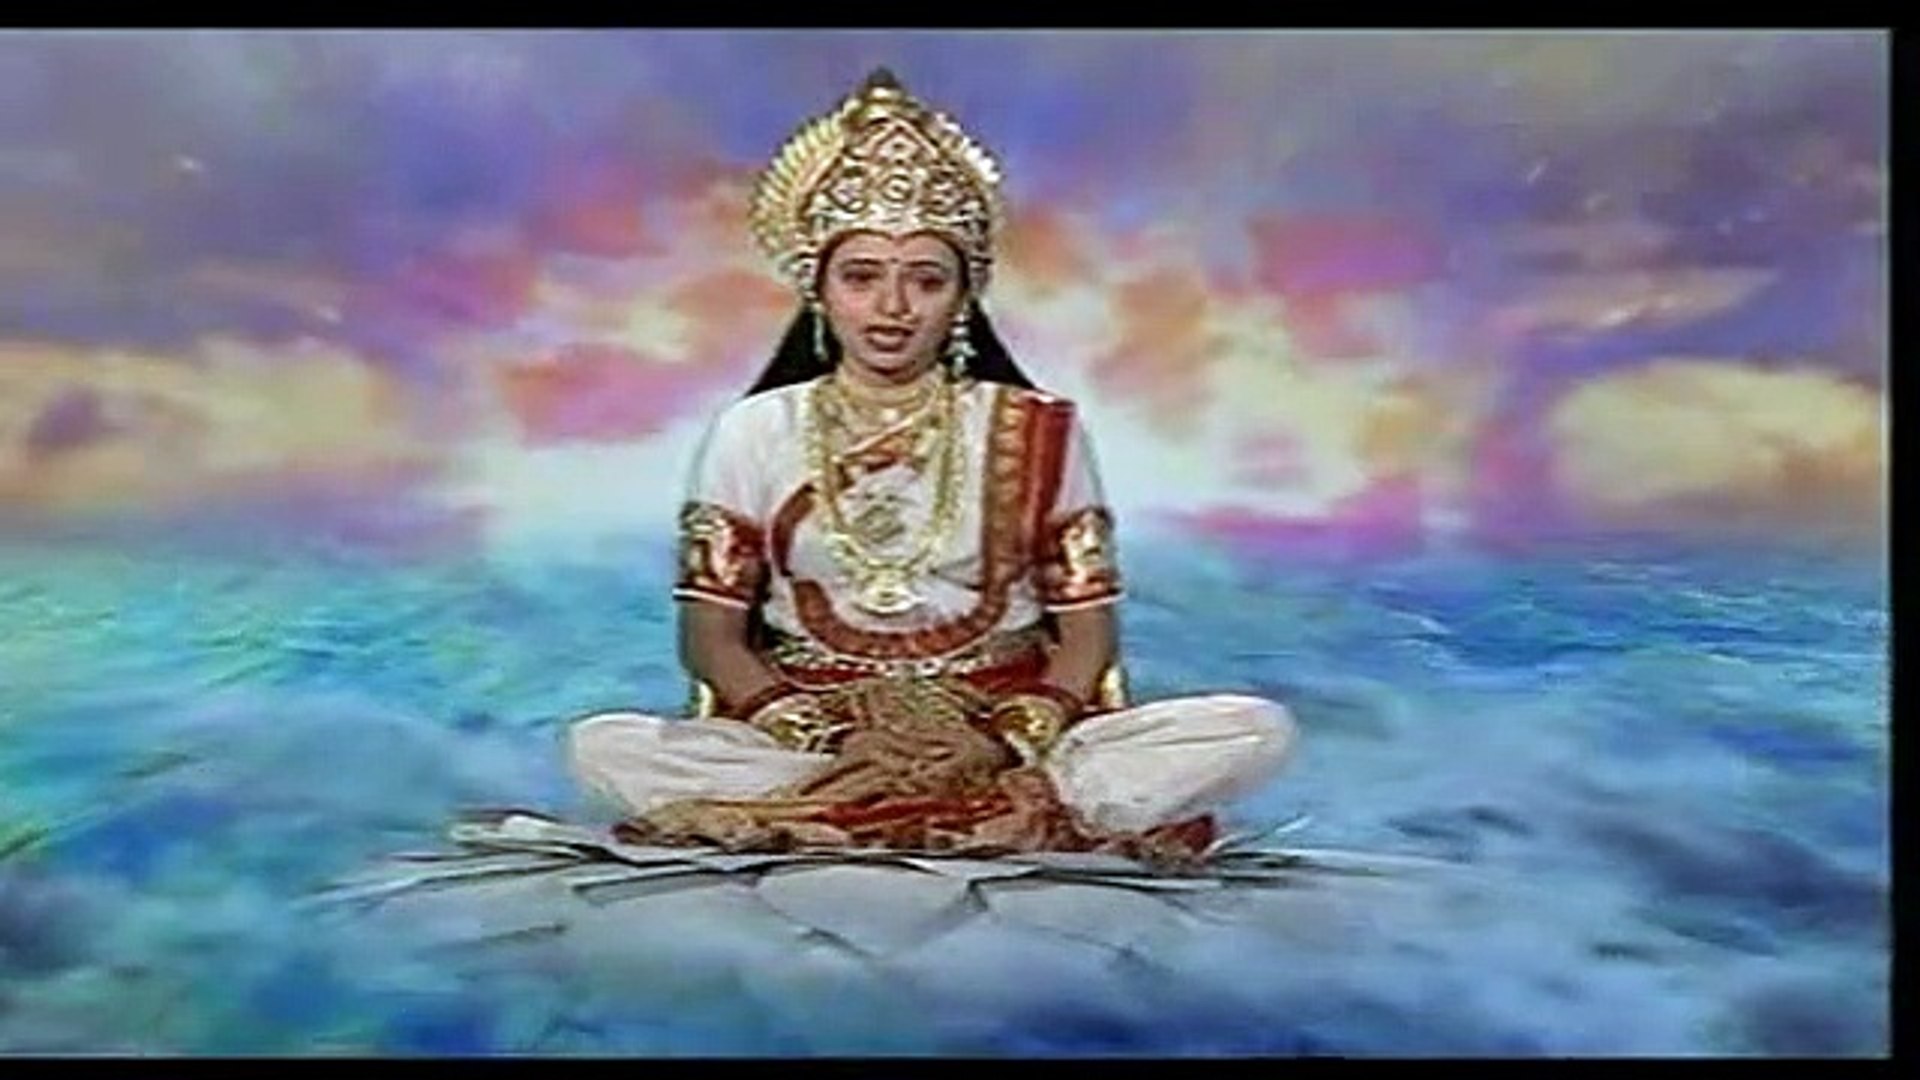 Jai Ganga Maiya Ramanand Sagar Episode 91 Video Dailymotion Ganga is a living goddess born from the divine feet of lord vishnu preserved in the kamandal of brahma sustained in his locks by shiva brought to earth. jai ganga maiya ramanand sagar episode 91